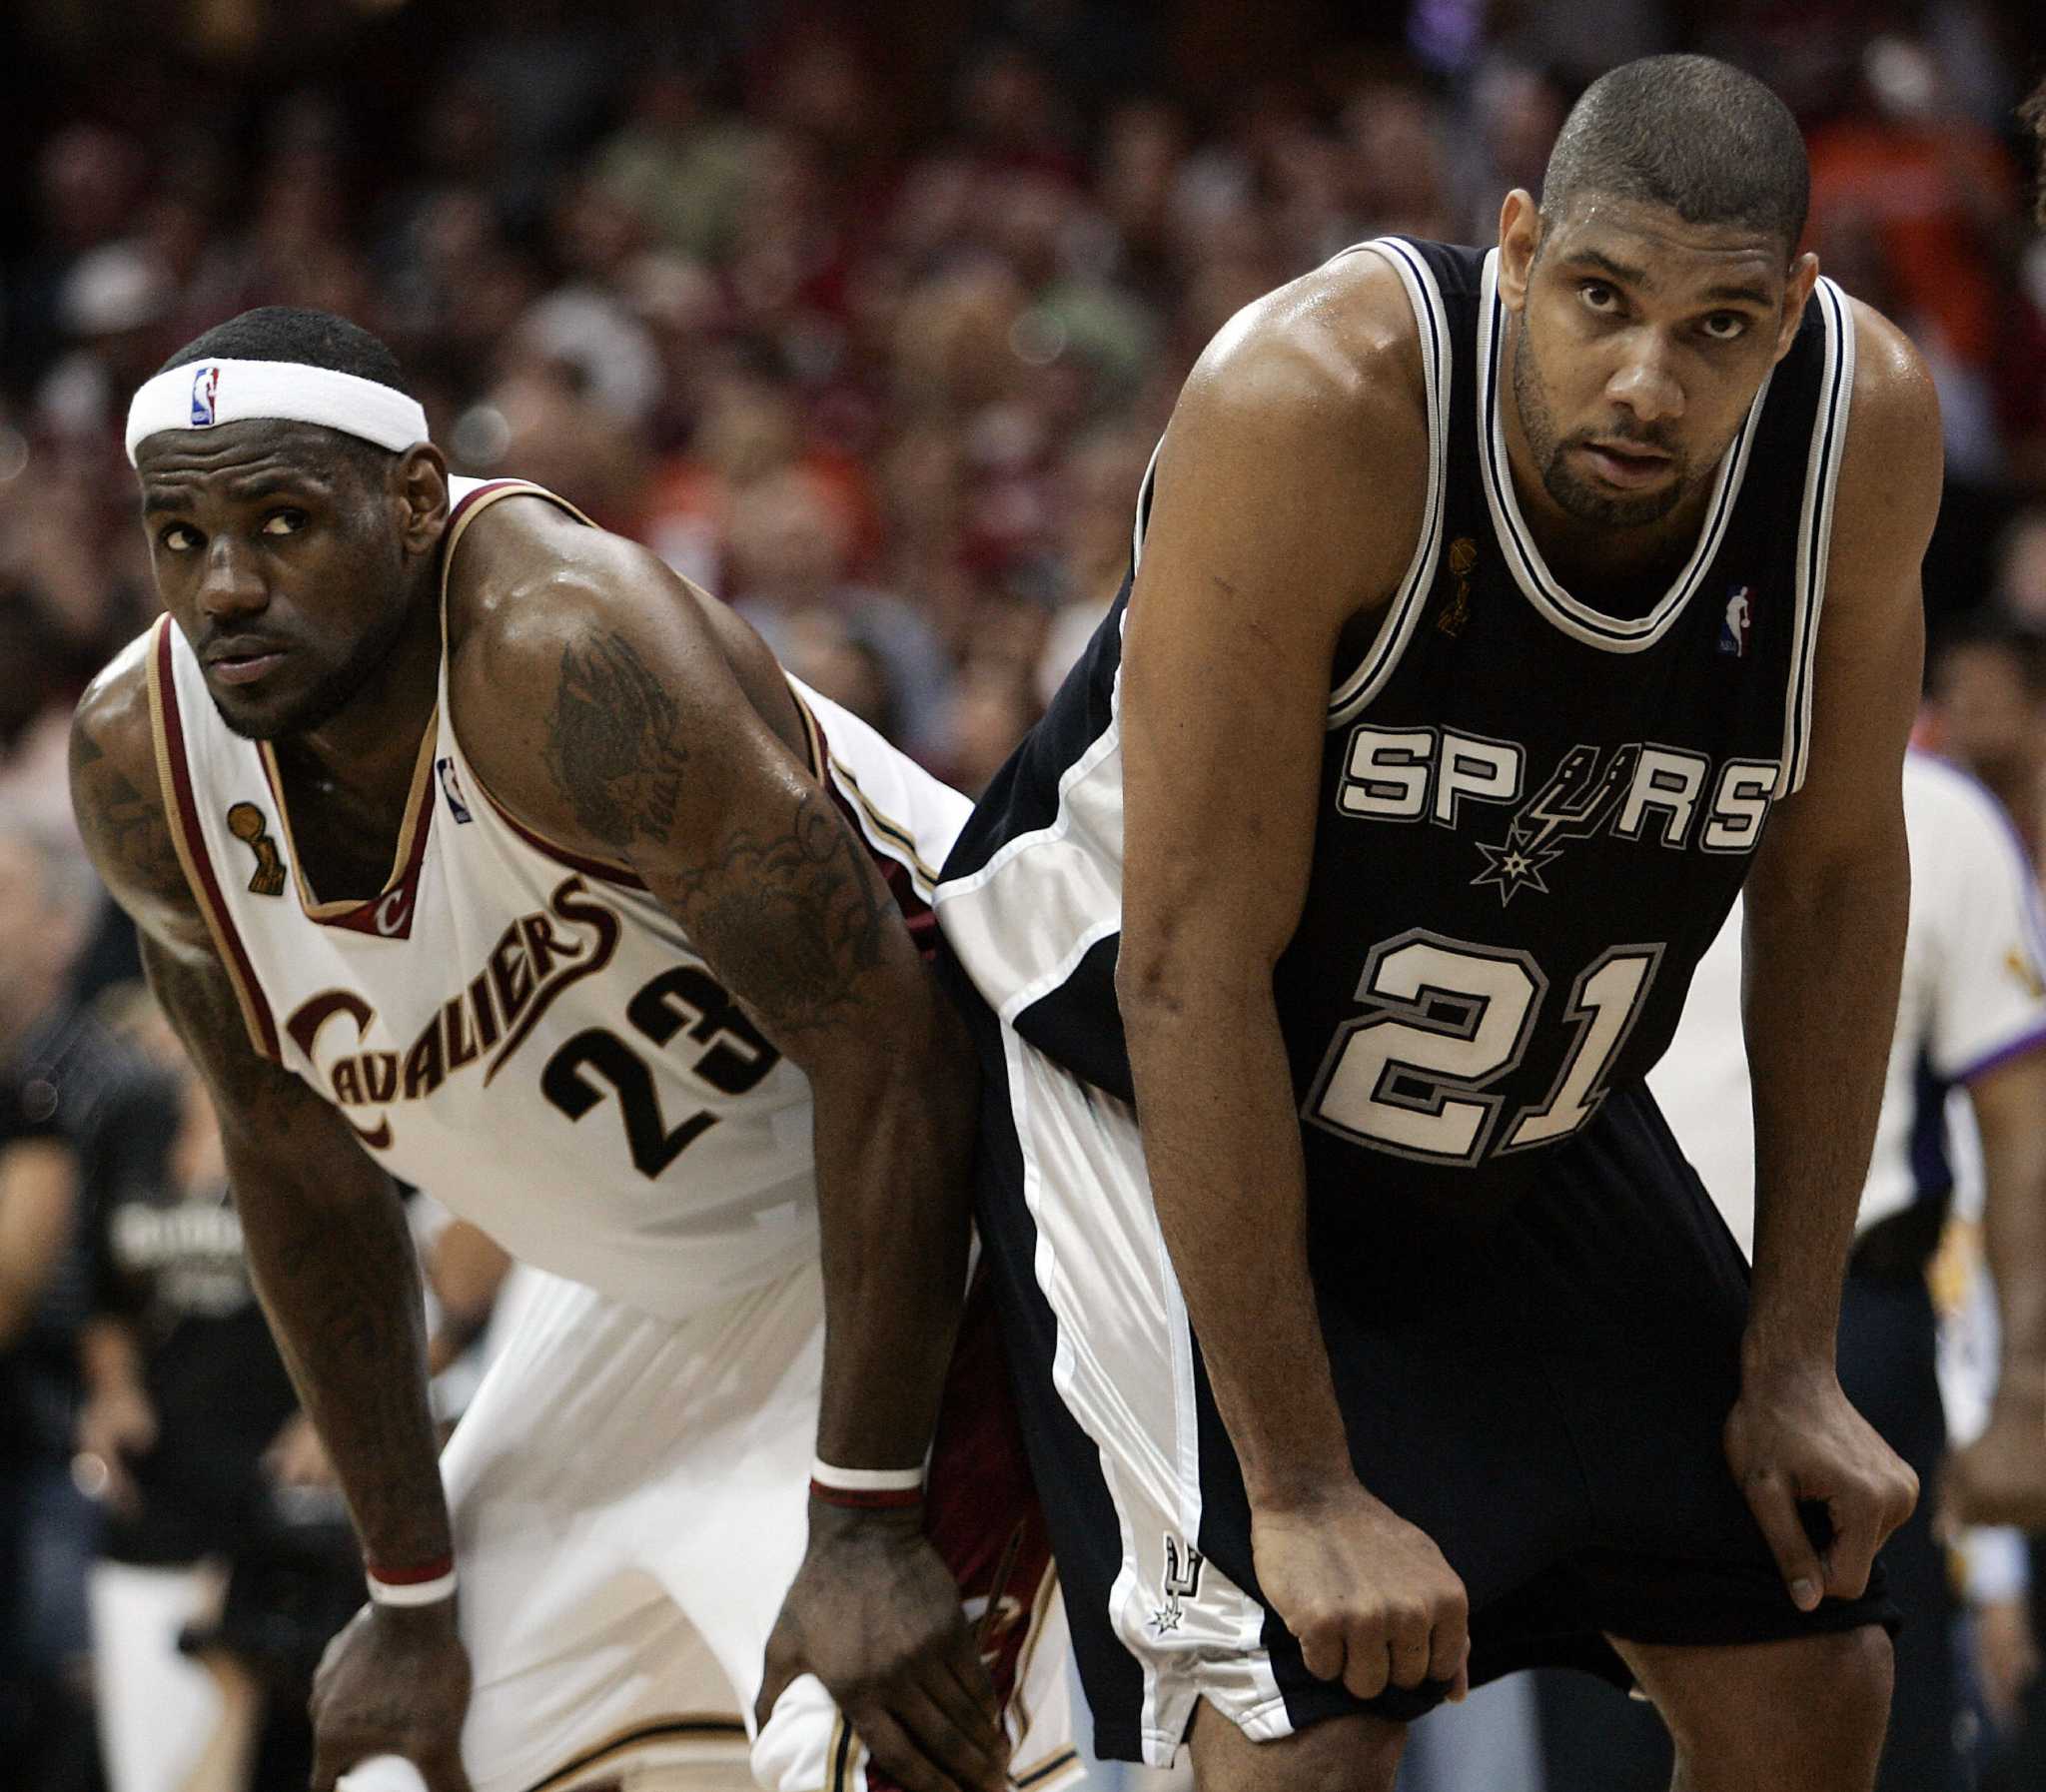 Tim Duncan and LeBron James bent over next to each other.